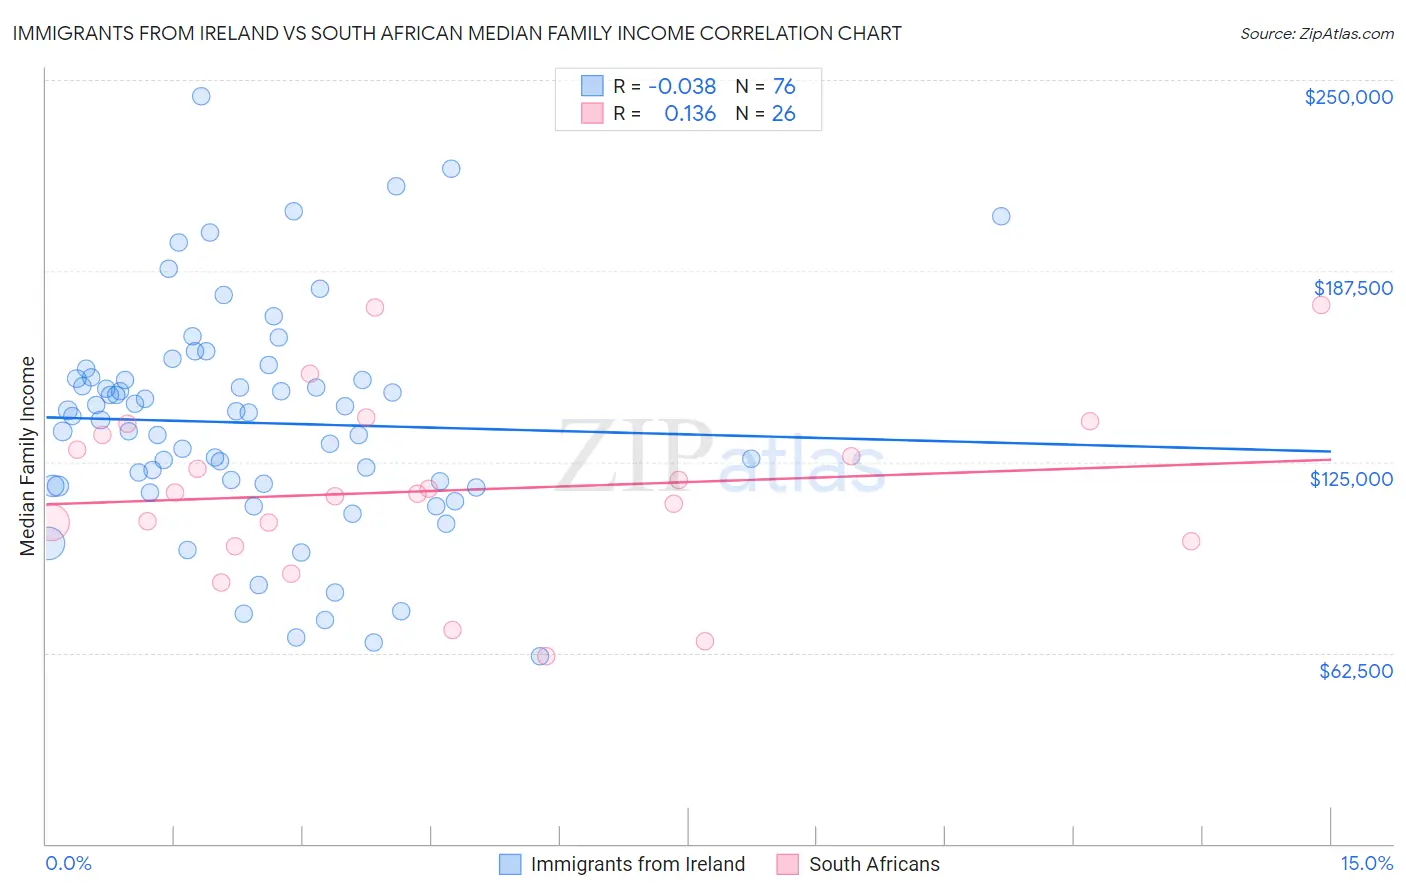 Immigrants from Ireland vs South African Median Family Income